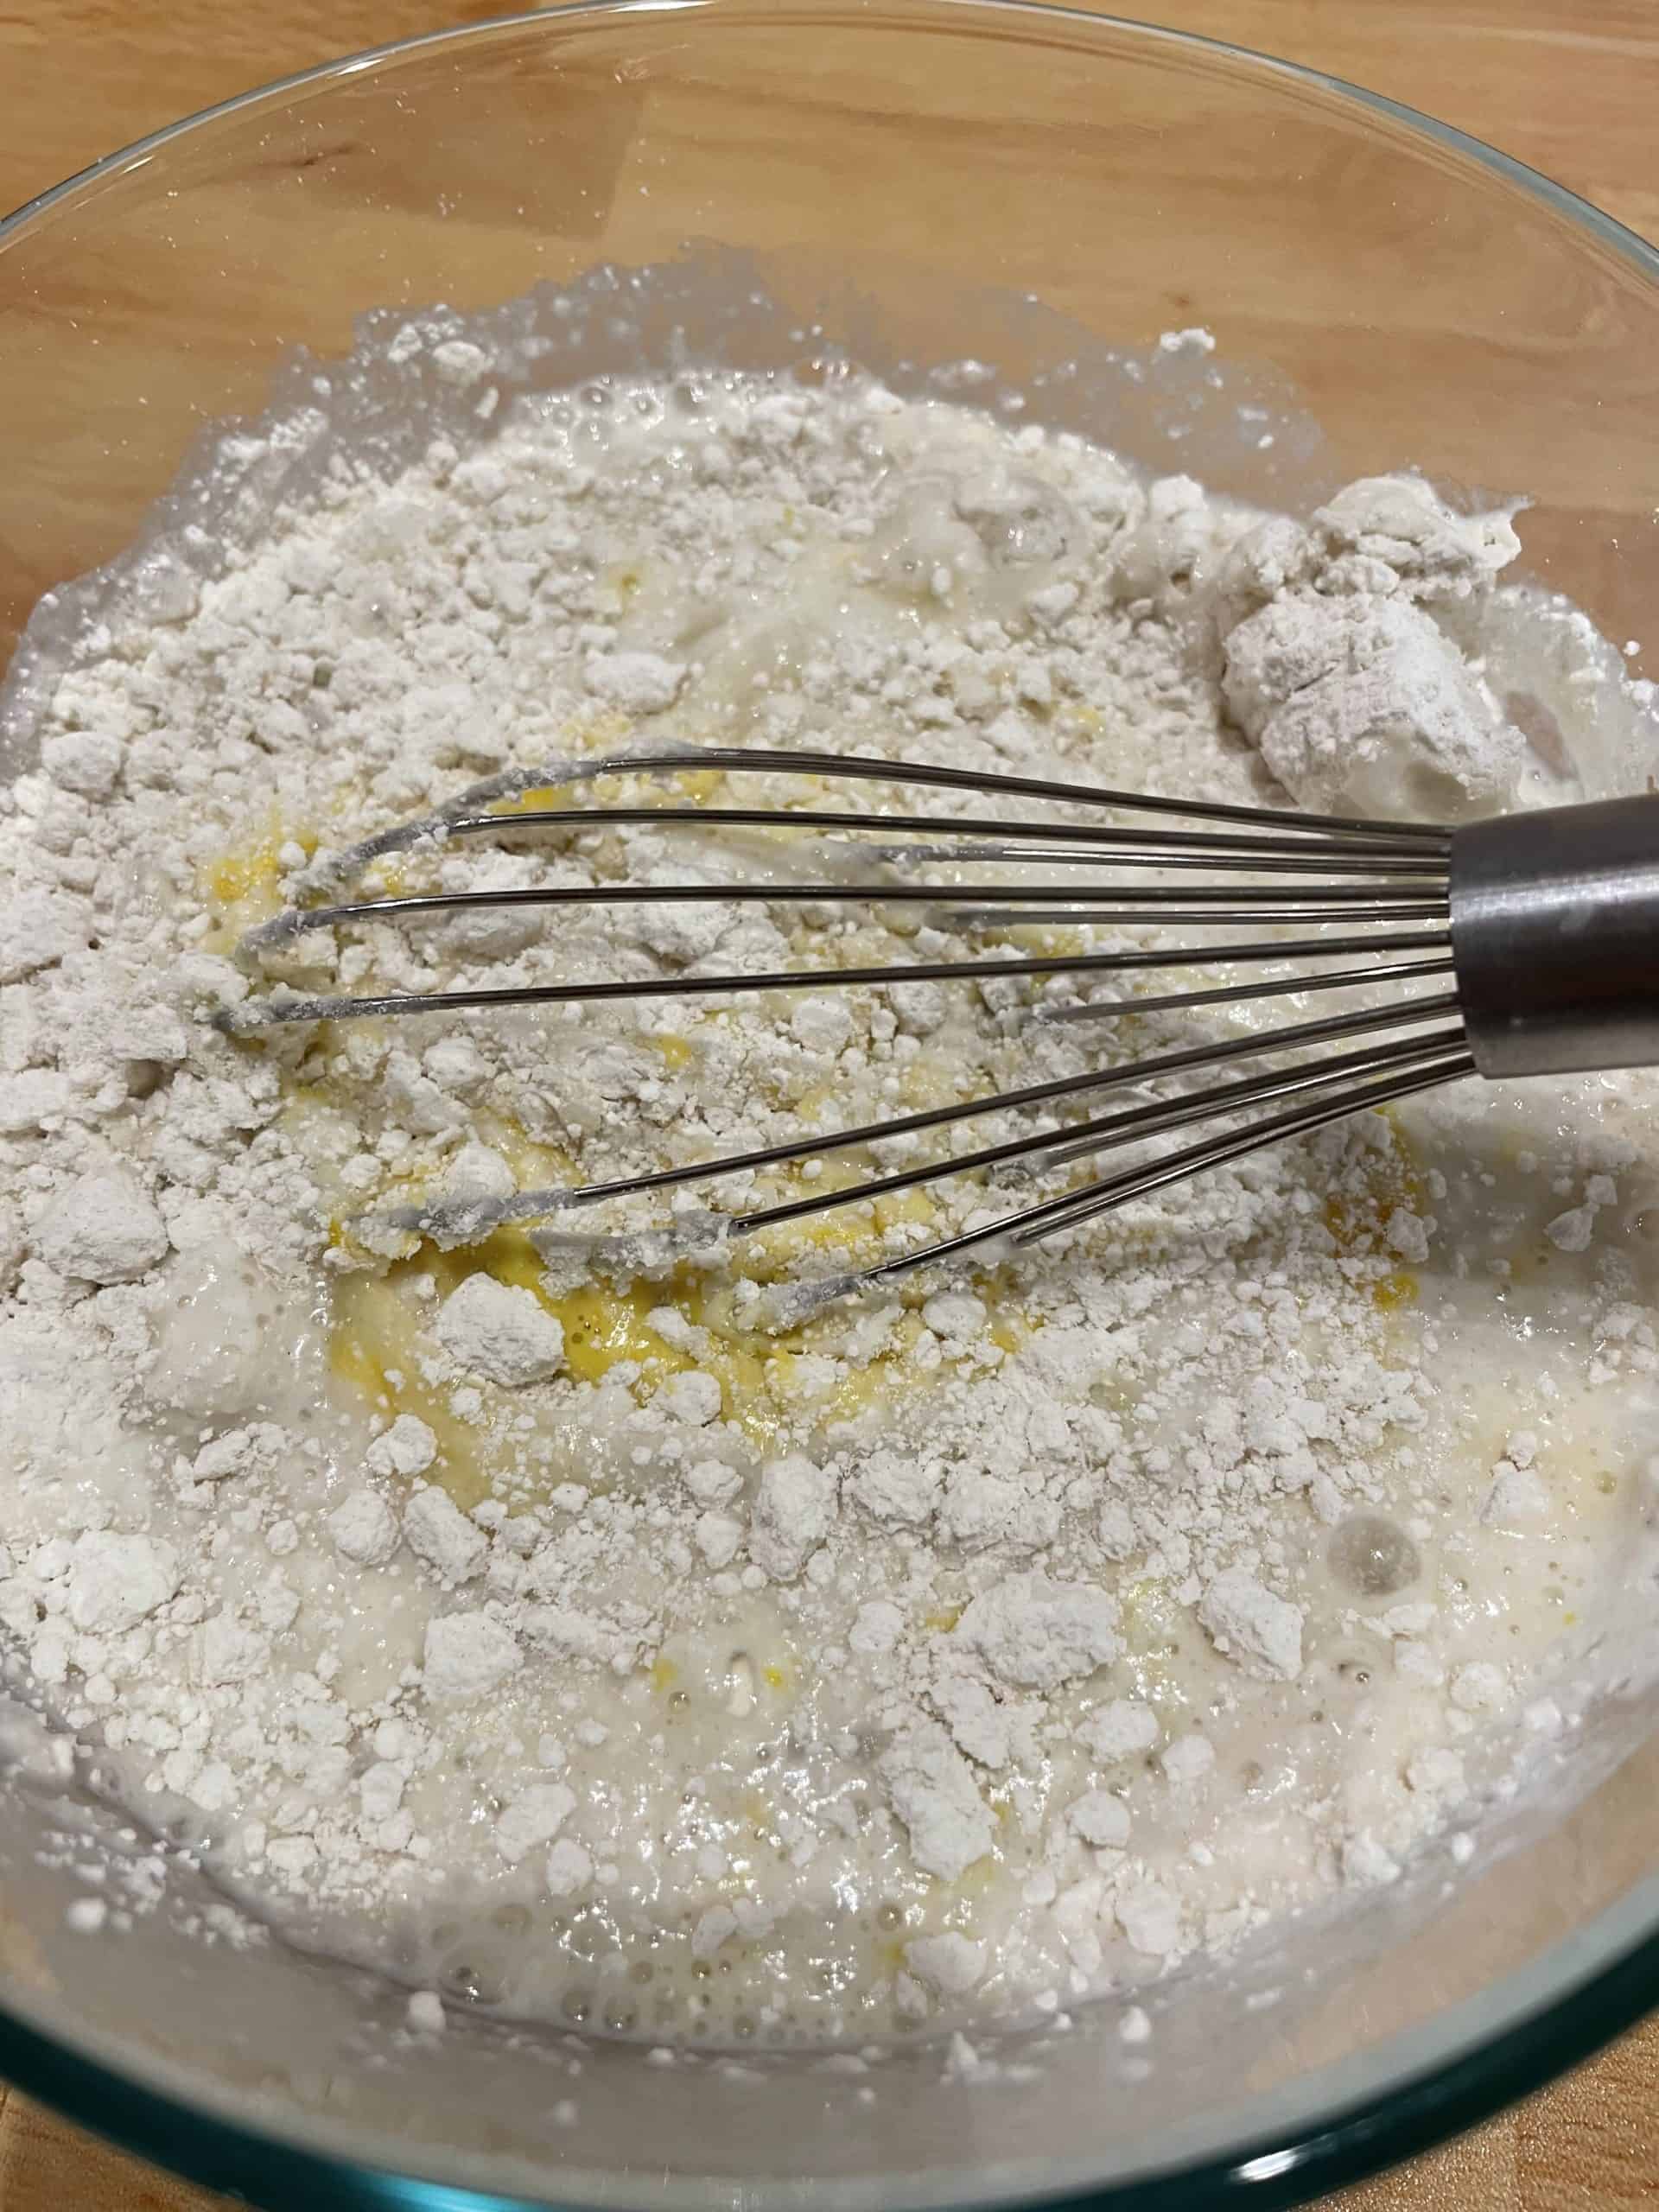 Combine the Pancake Mix, Milk, and Eggs together in a Bowl with a Whisk.